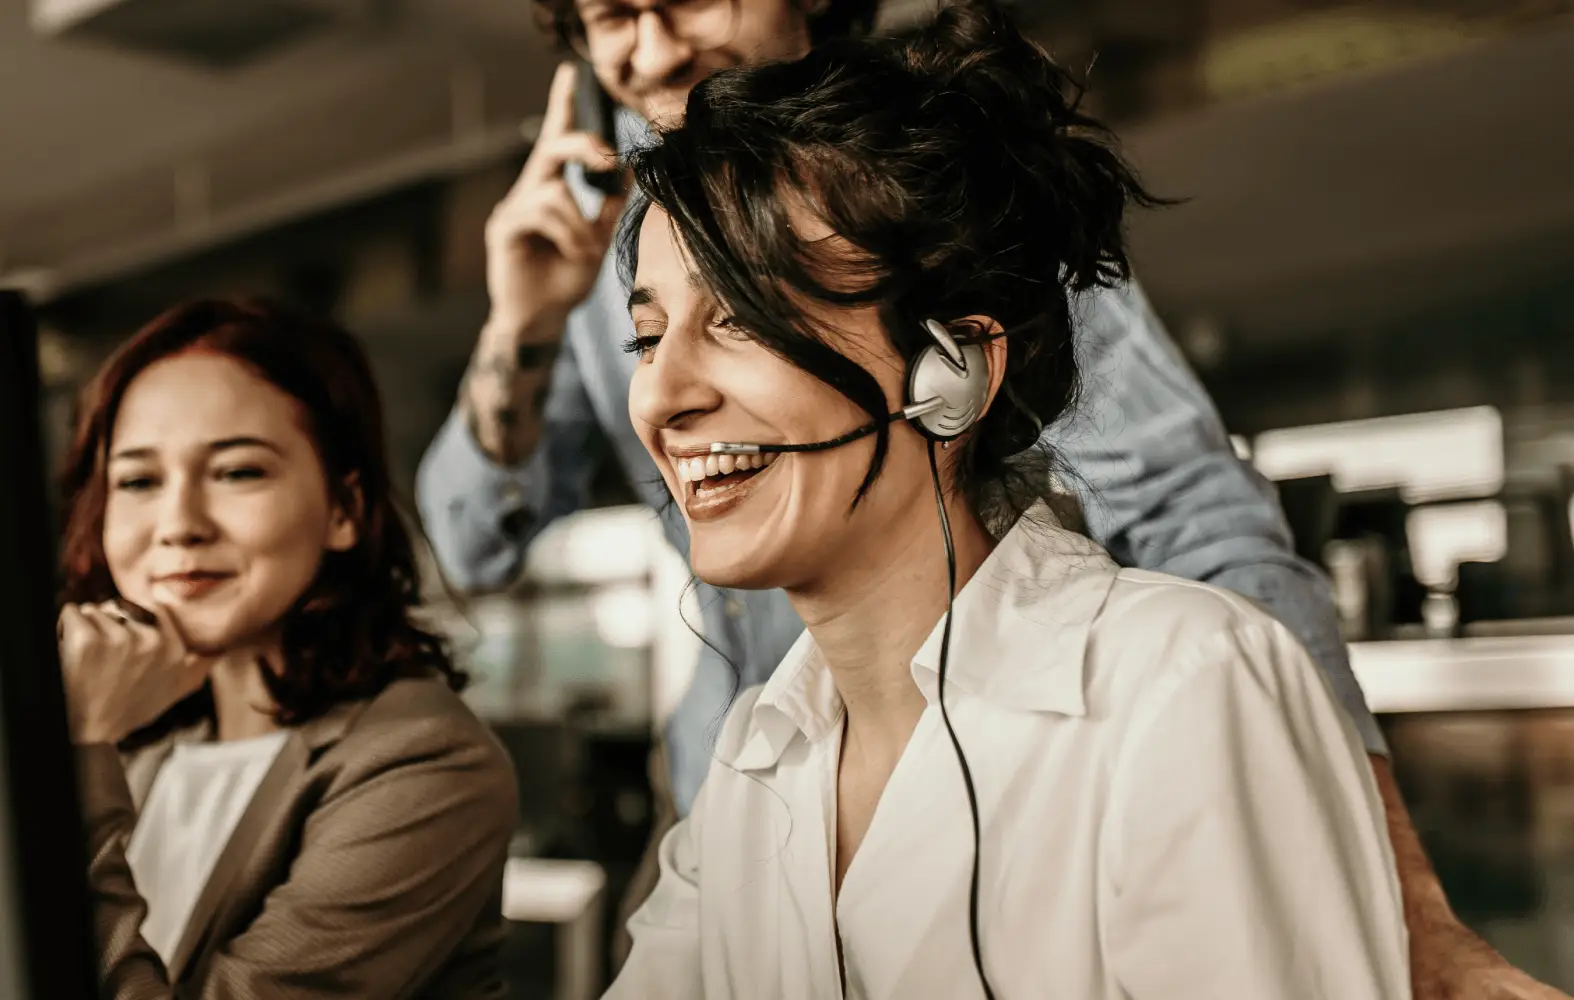 Three IT department employees smile while working, with one of them talking on a headset